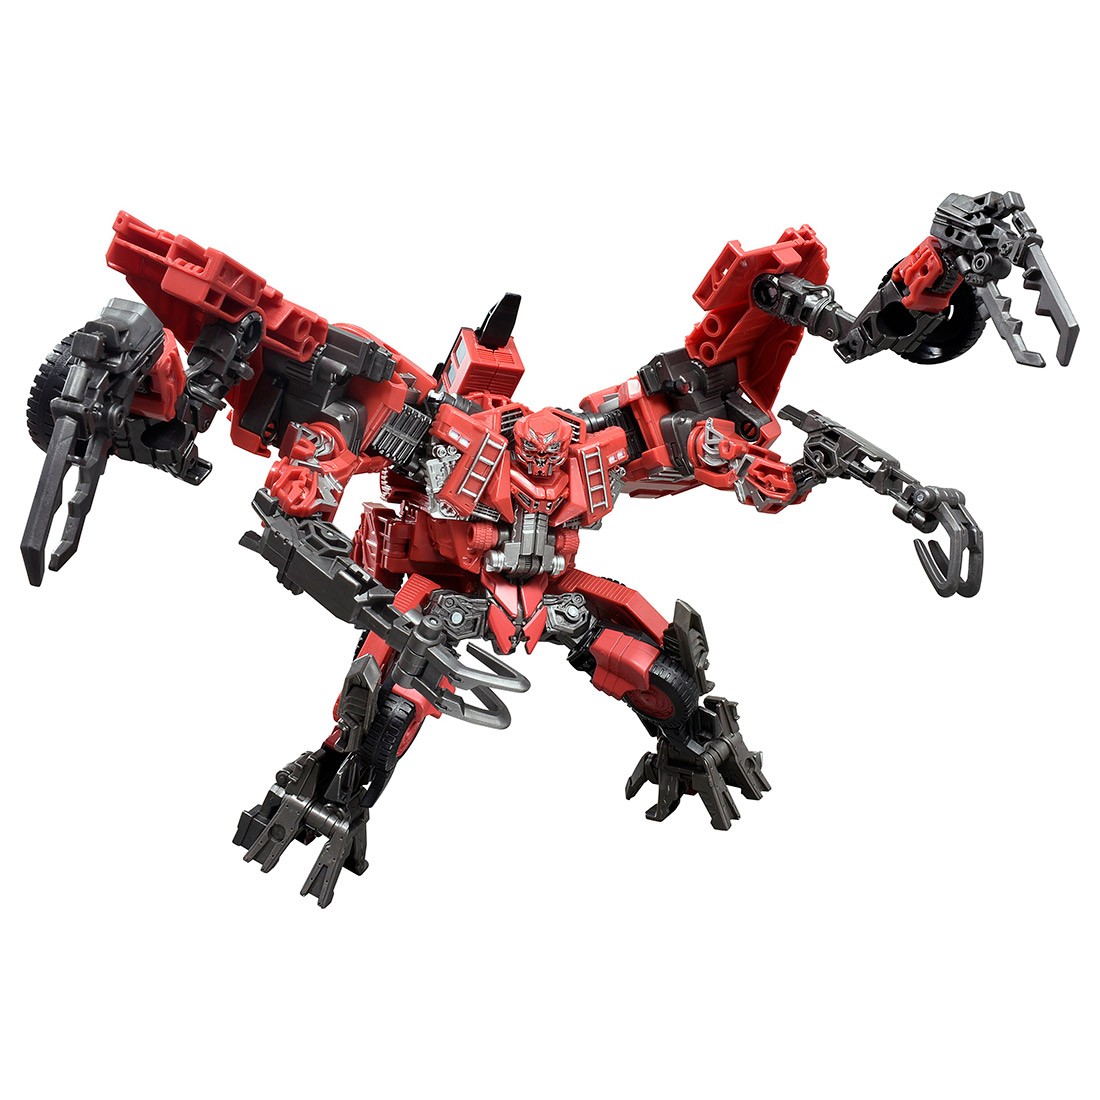 Transformers News: Takara Tomy Mall Shares New Photos of SS 53 Bumblebee Movie Cliffjumper and SS 54 RotF Overload